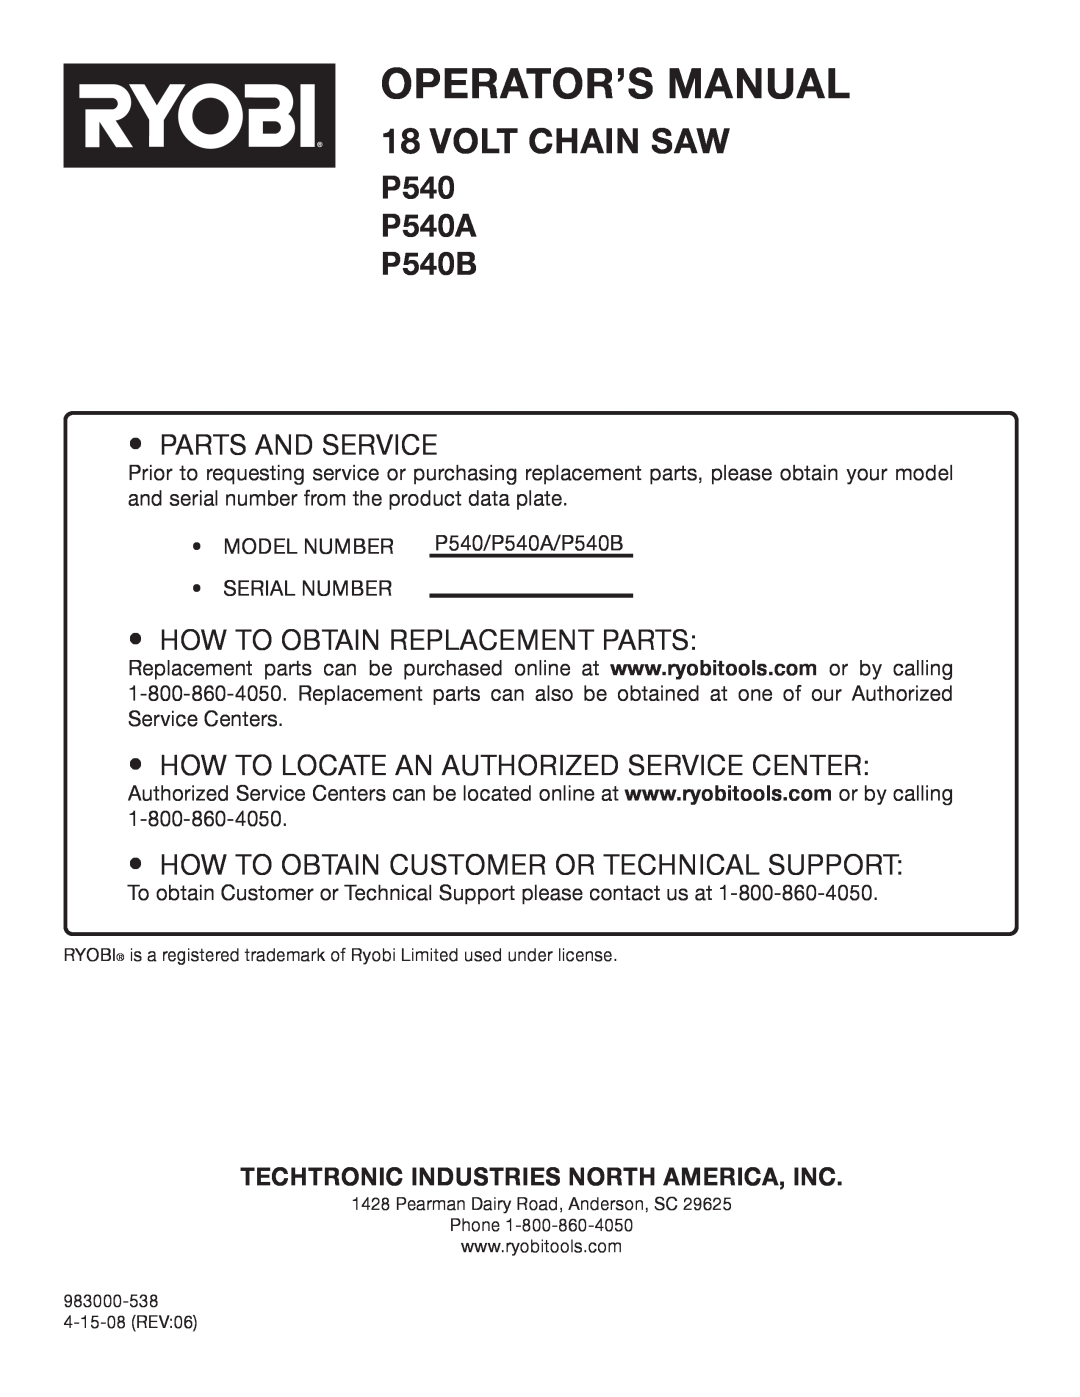 Ryobi P540 p540a P540B, Techtronic Industries North America, Inc, Operator’S Manual, VOLT cHAIN sAW, Parts and Service 